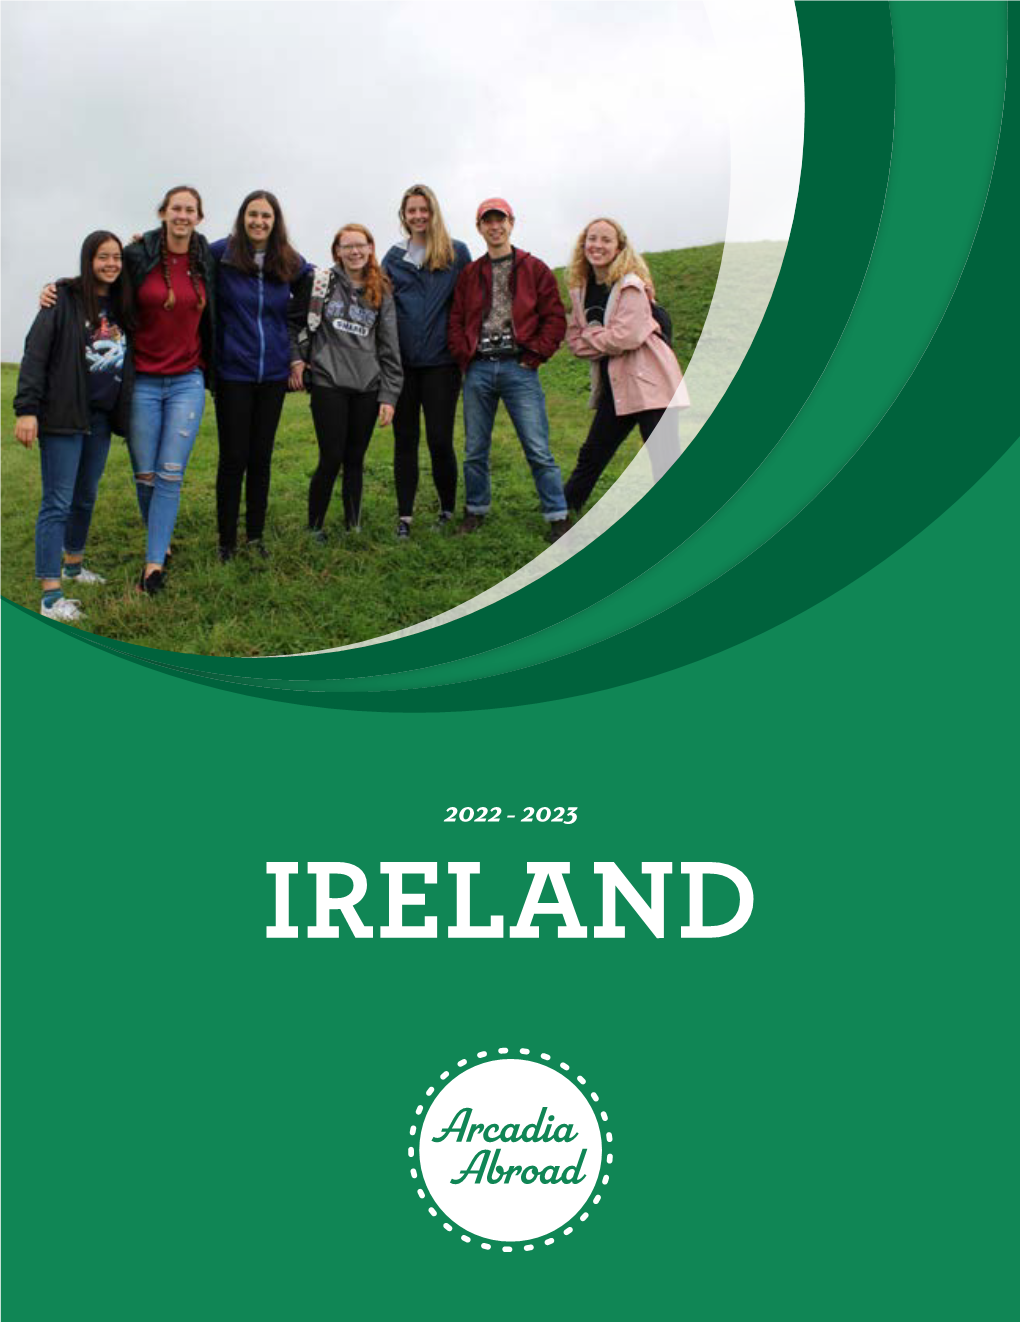 IRELAND Welcome to Time to Explore the World & Your Potential